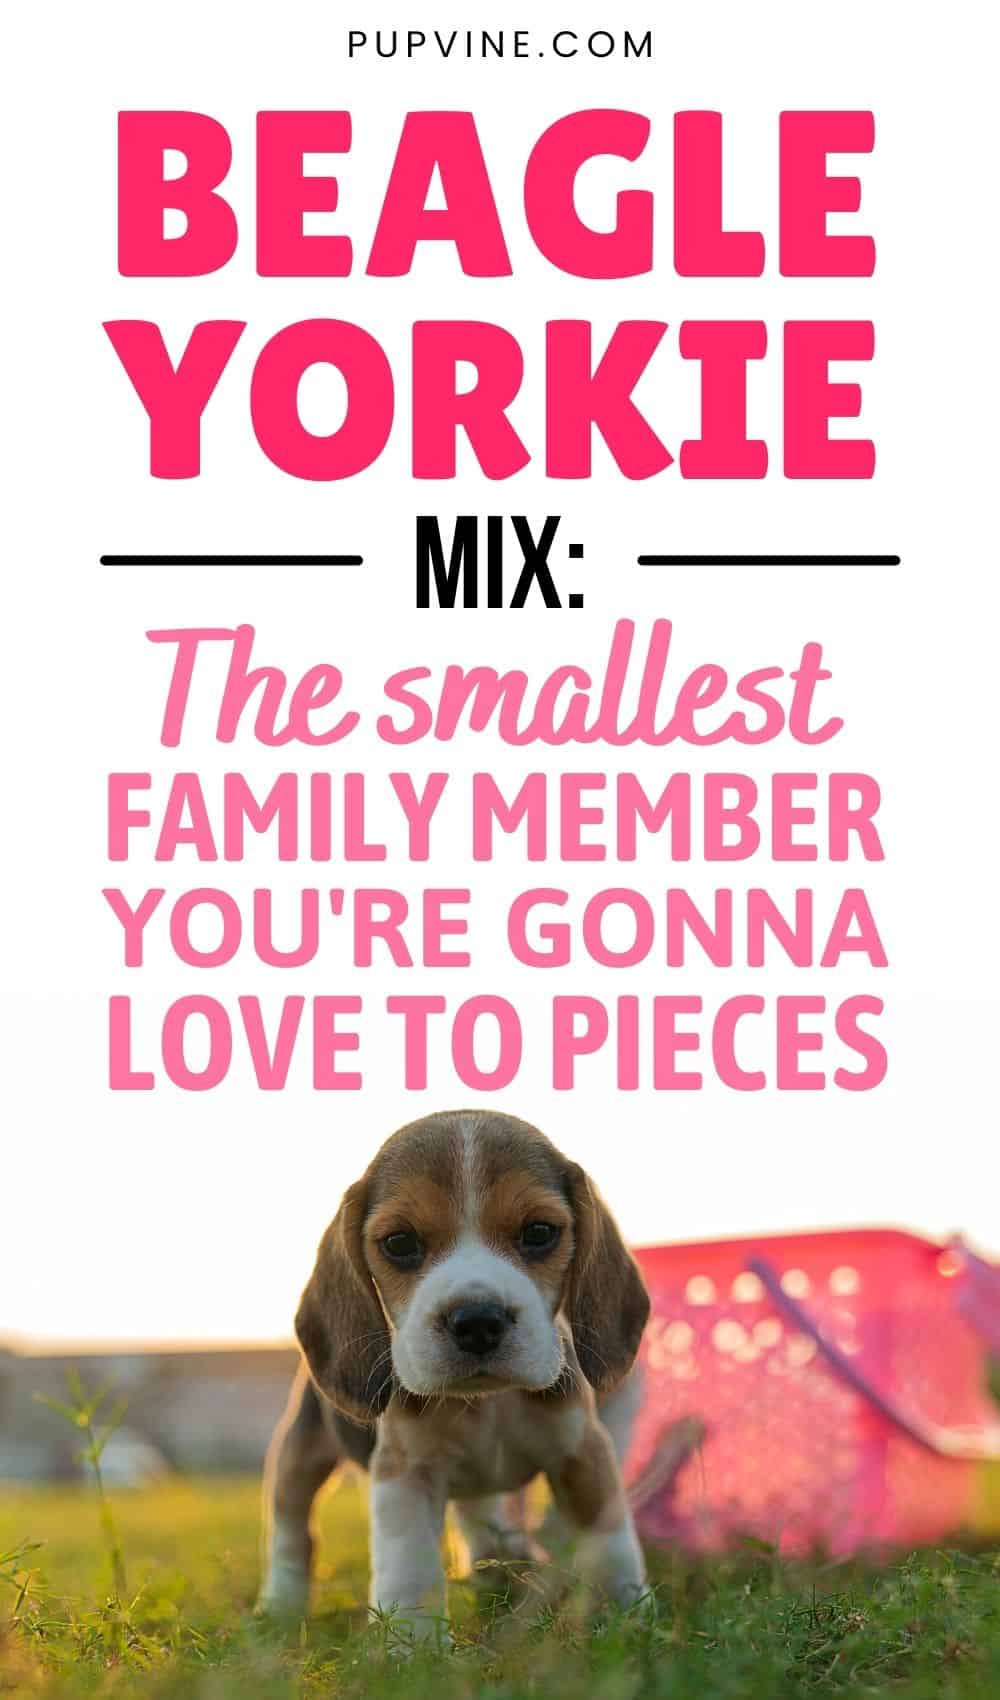 Beagle Yorkie Mix The Smallest Family Member You're Gonna Love To Pieces